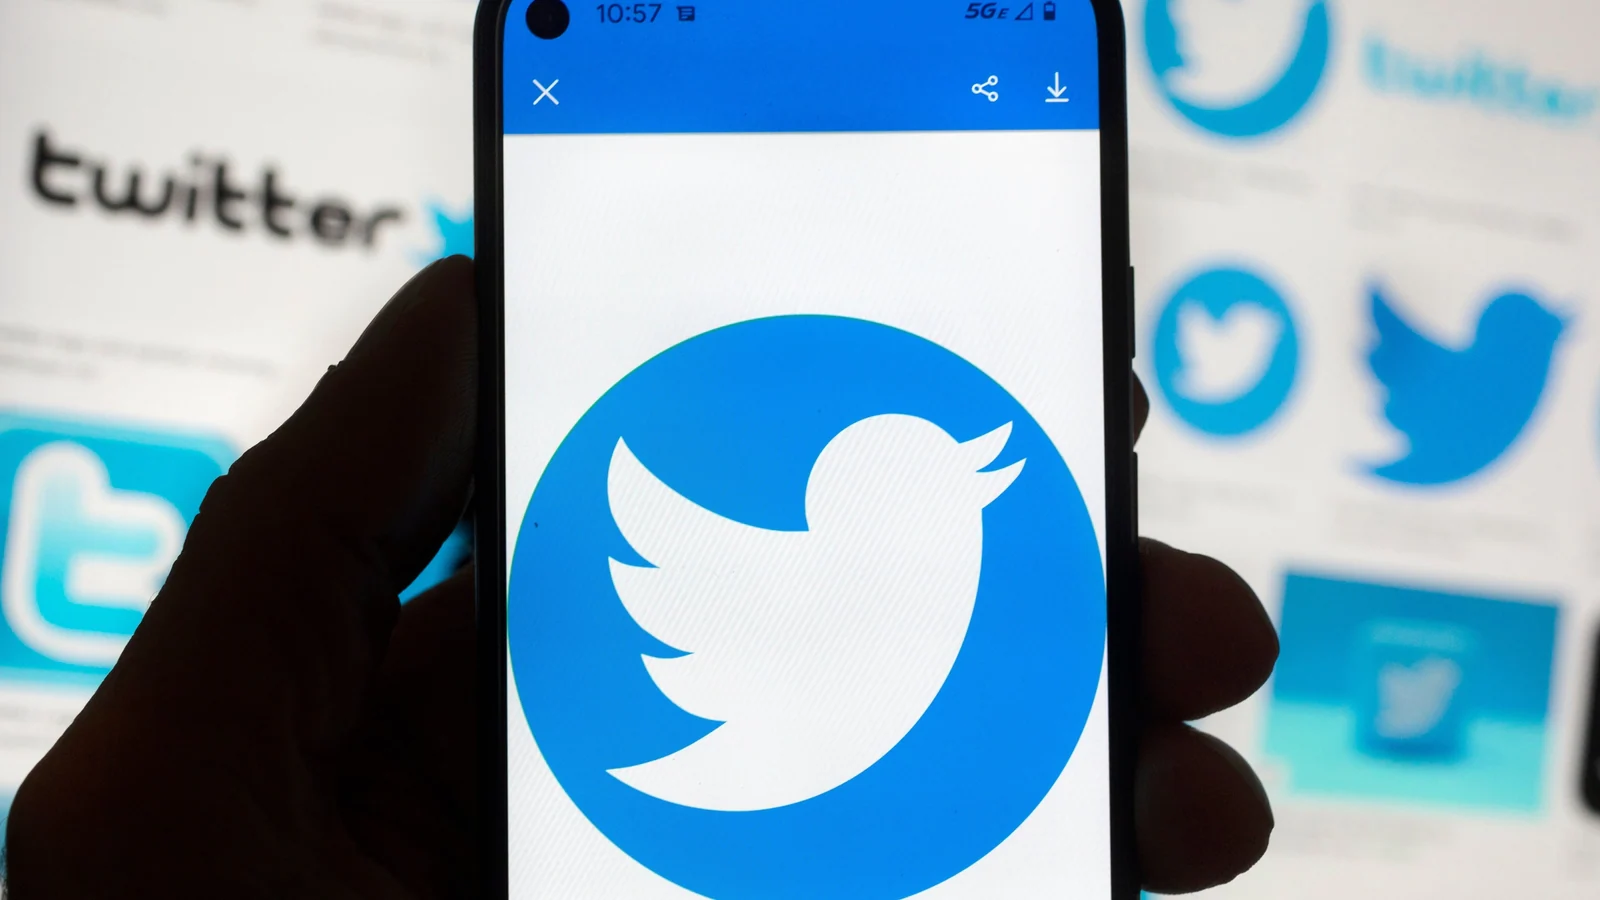 Twitter will present an ‘Official’ label for a few verified accounts